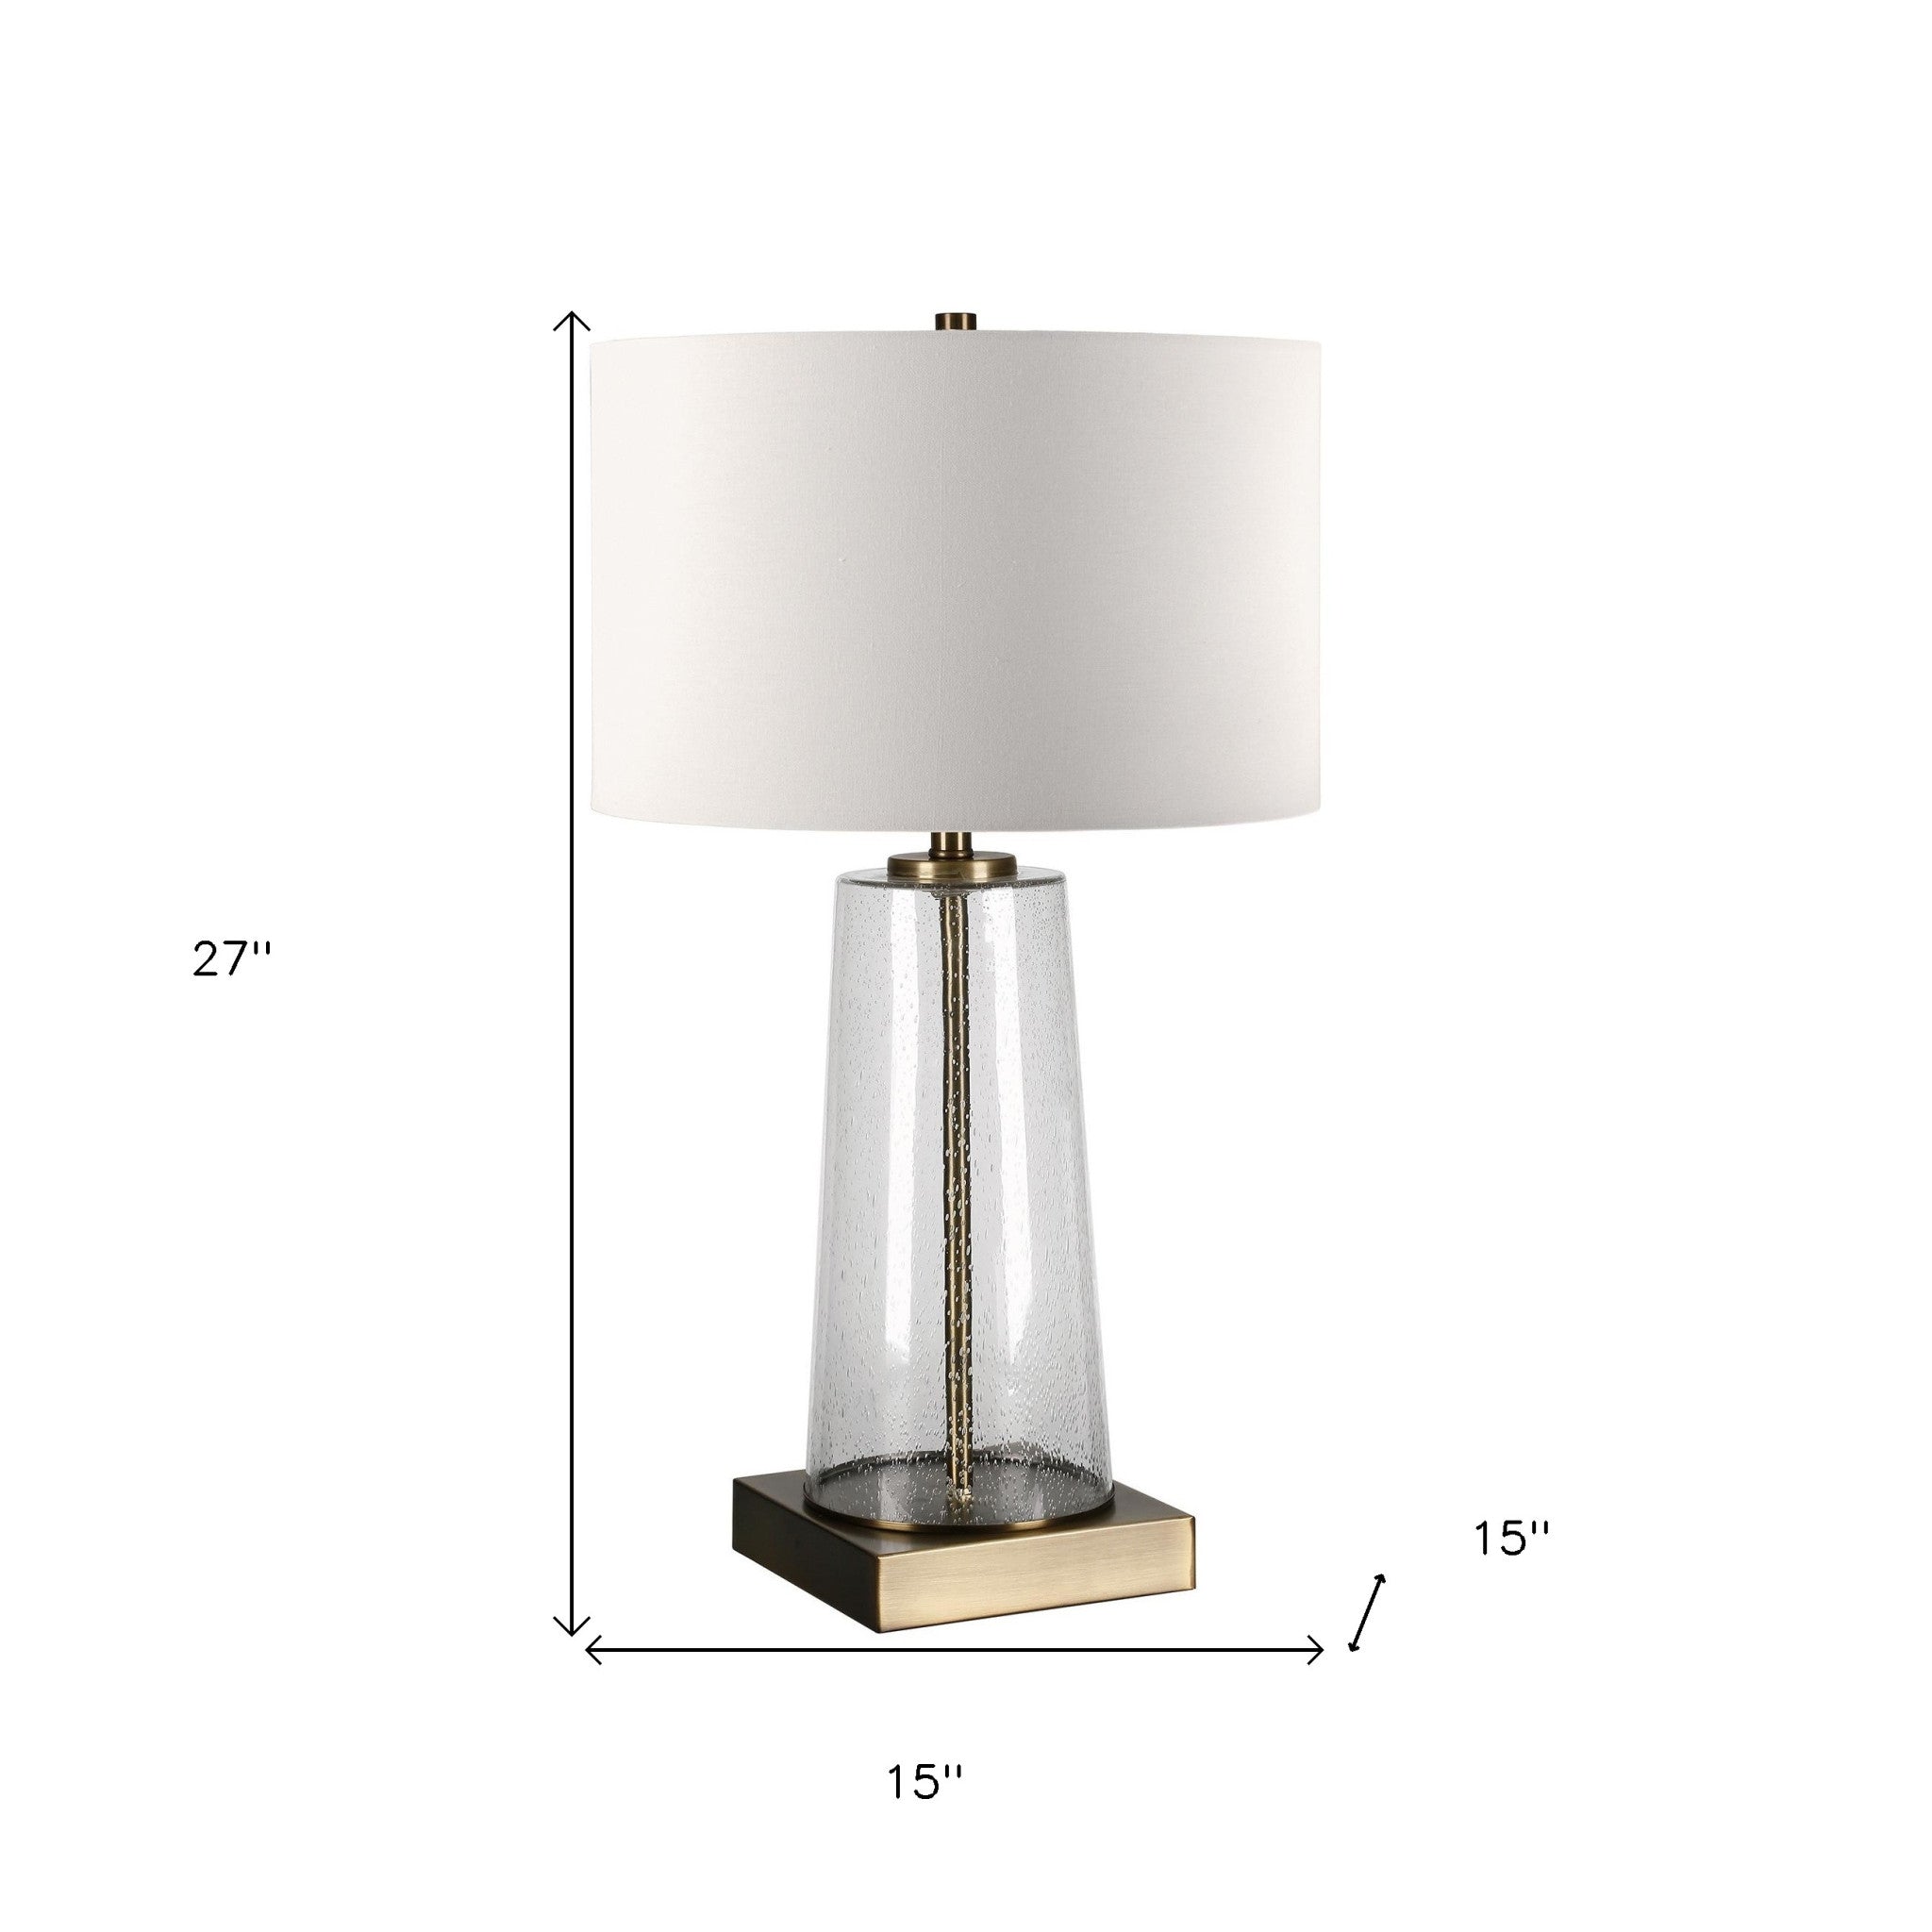 27" Brass Glass Table Lamp With White Drum Shade